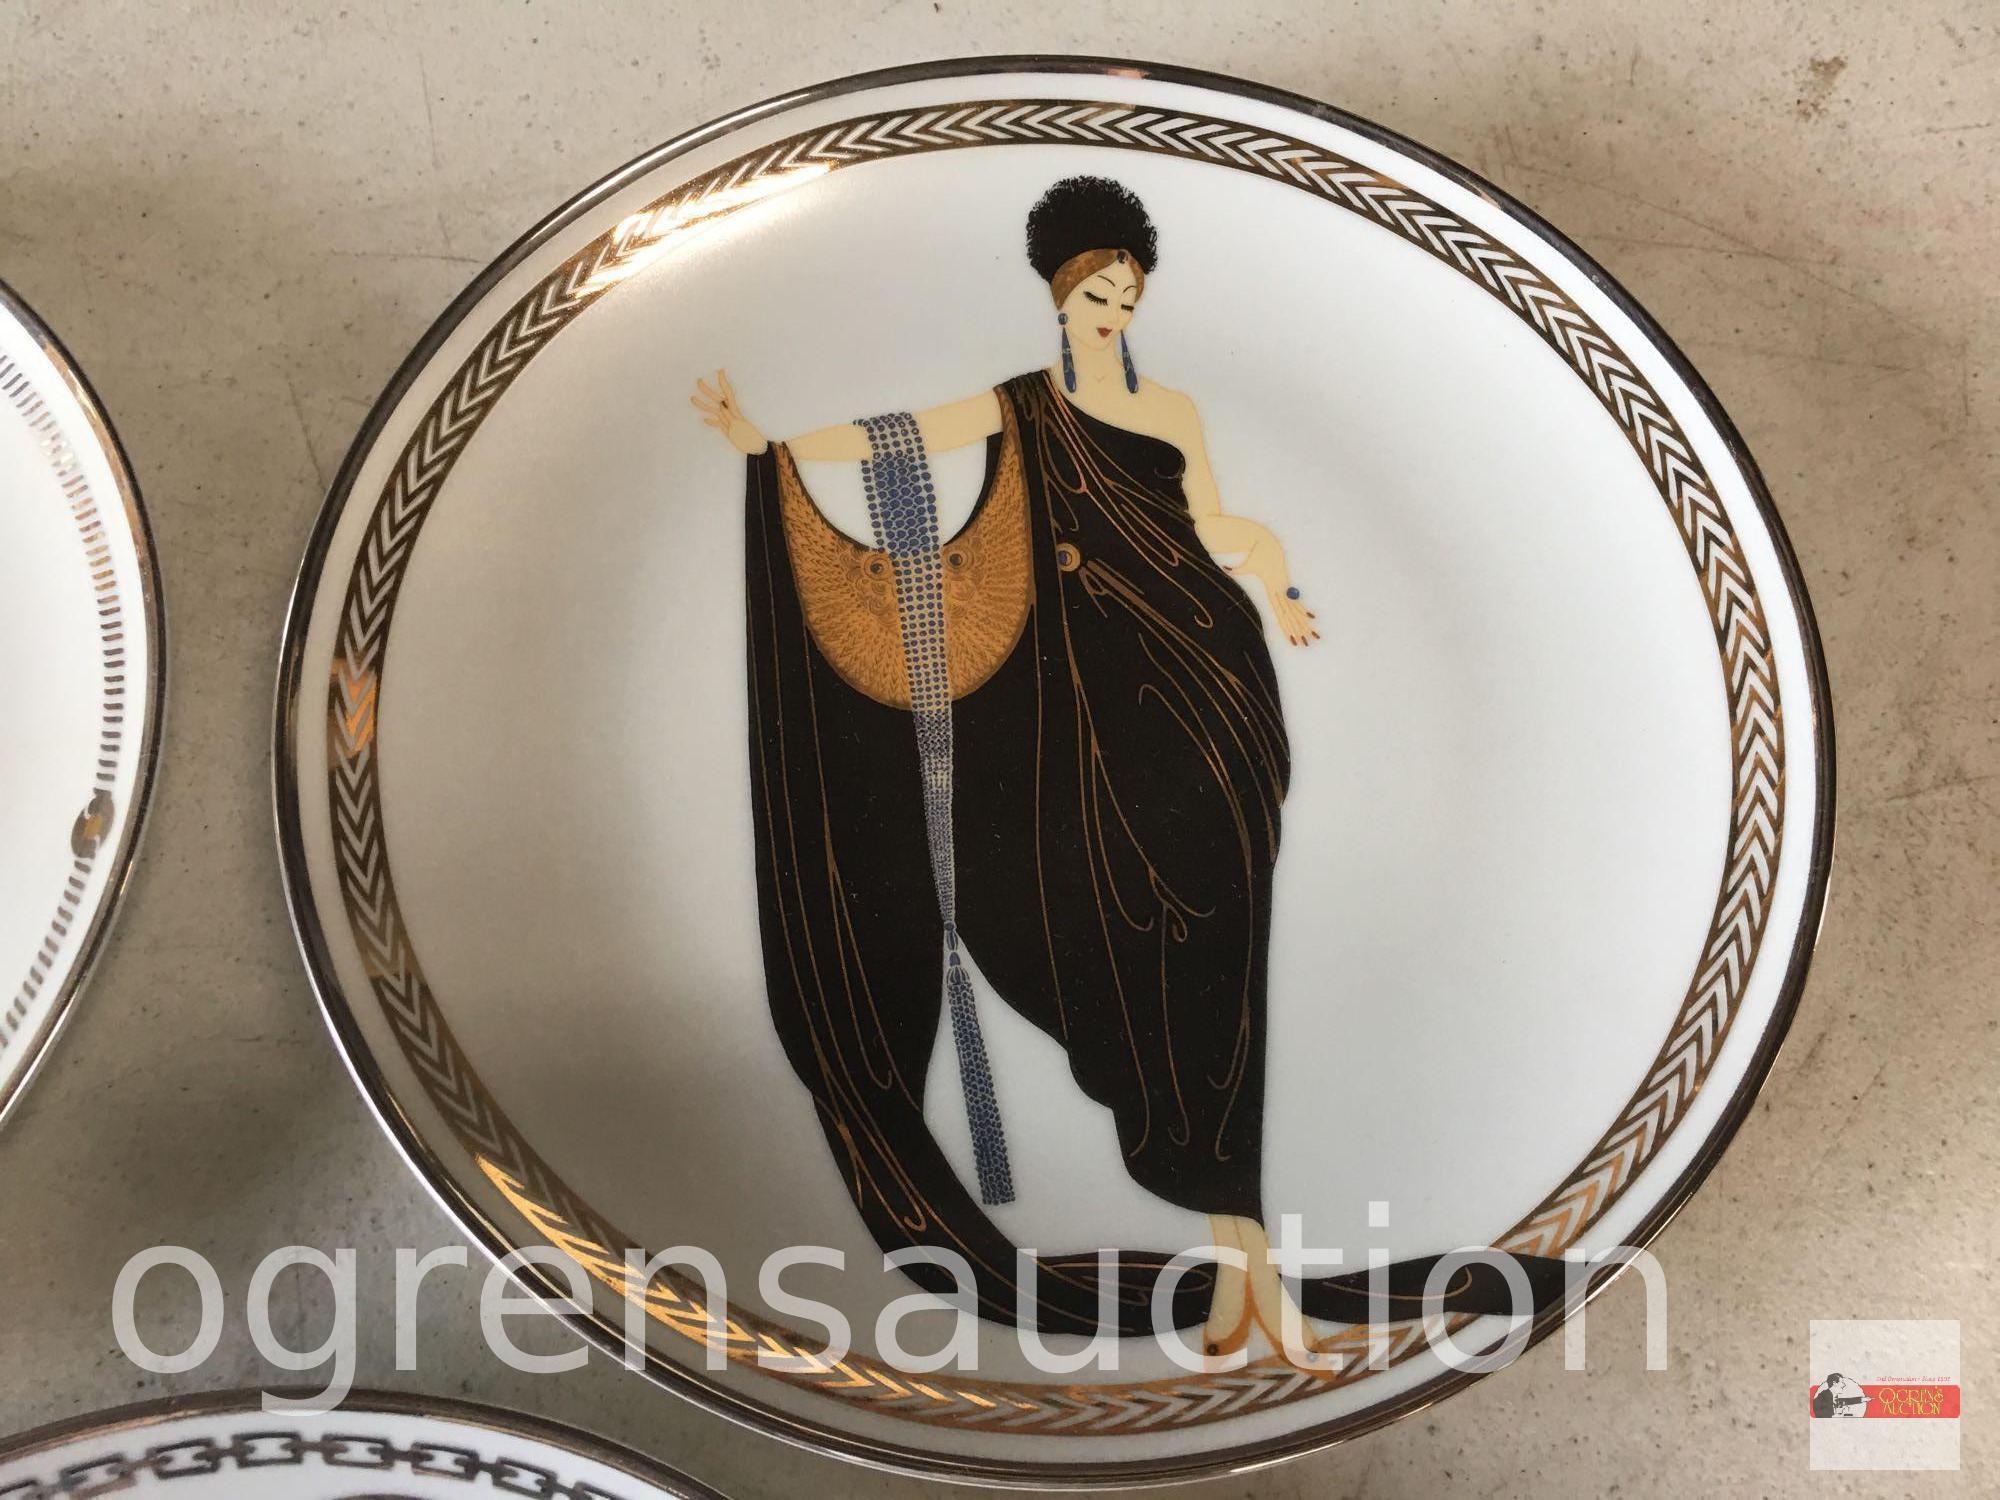 Collectibles - 5 Collector plates, Art Deco House of Erte', 8.25"w